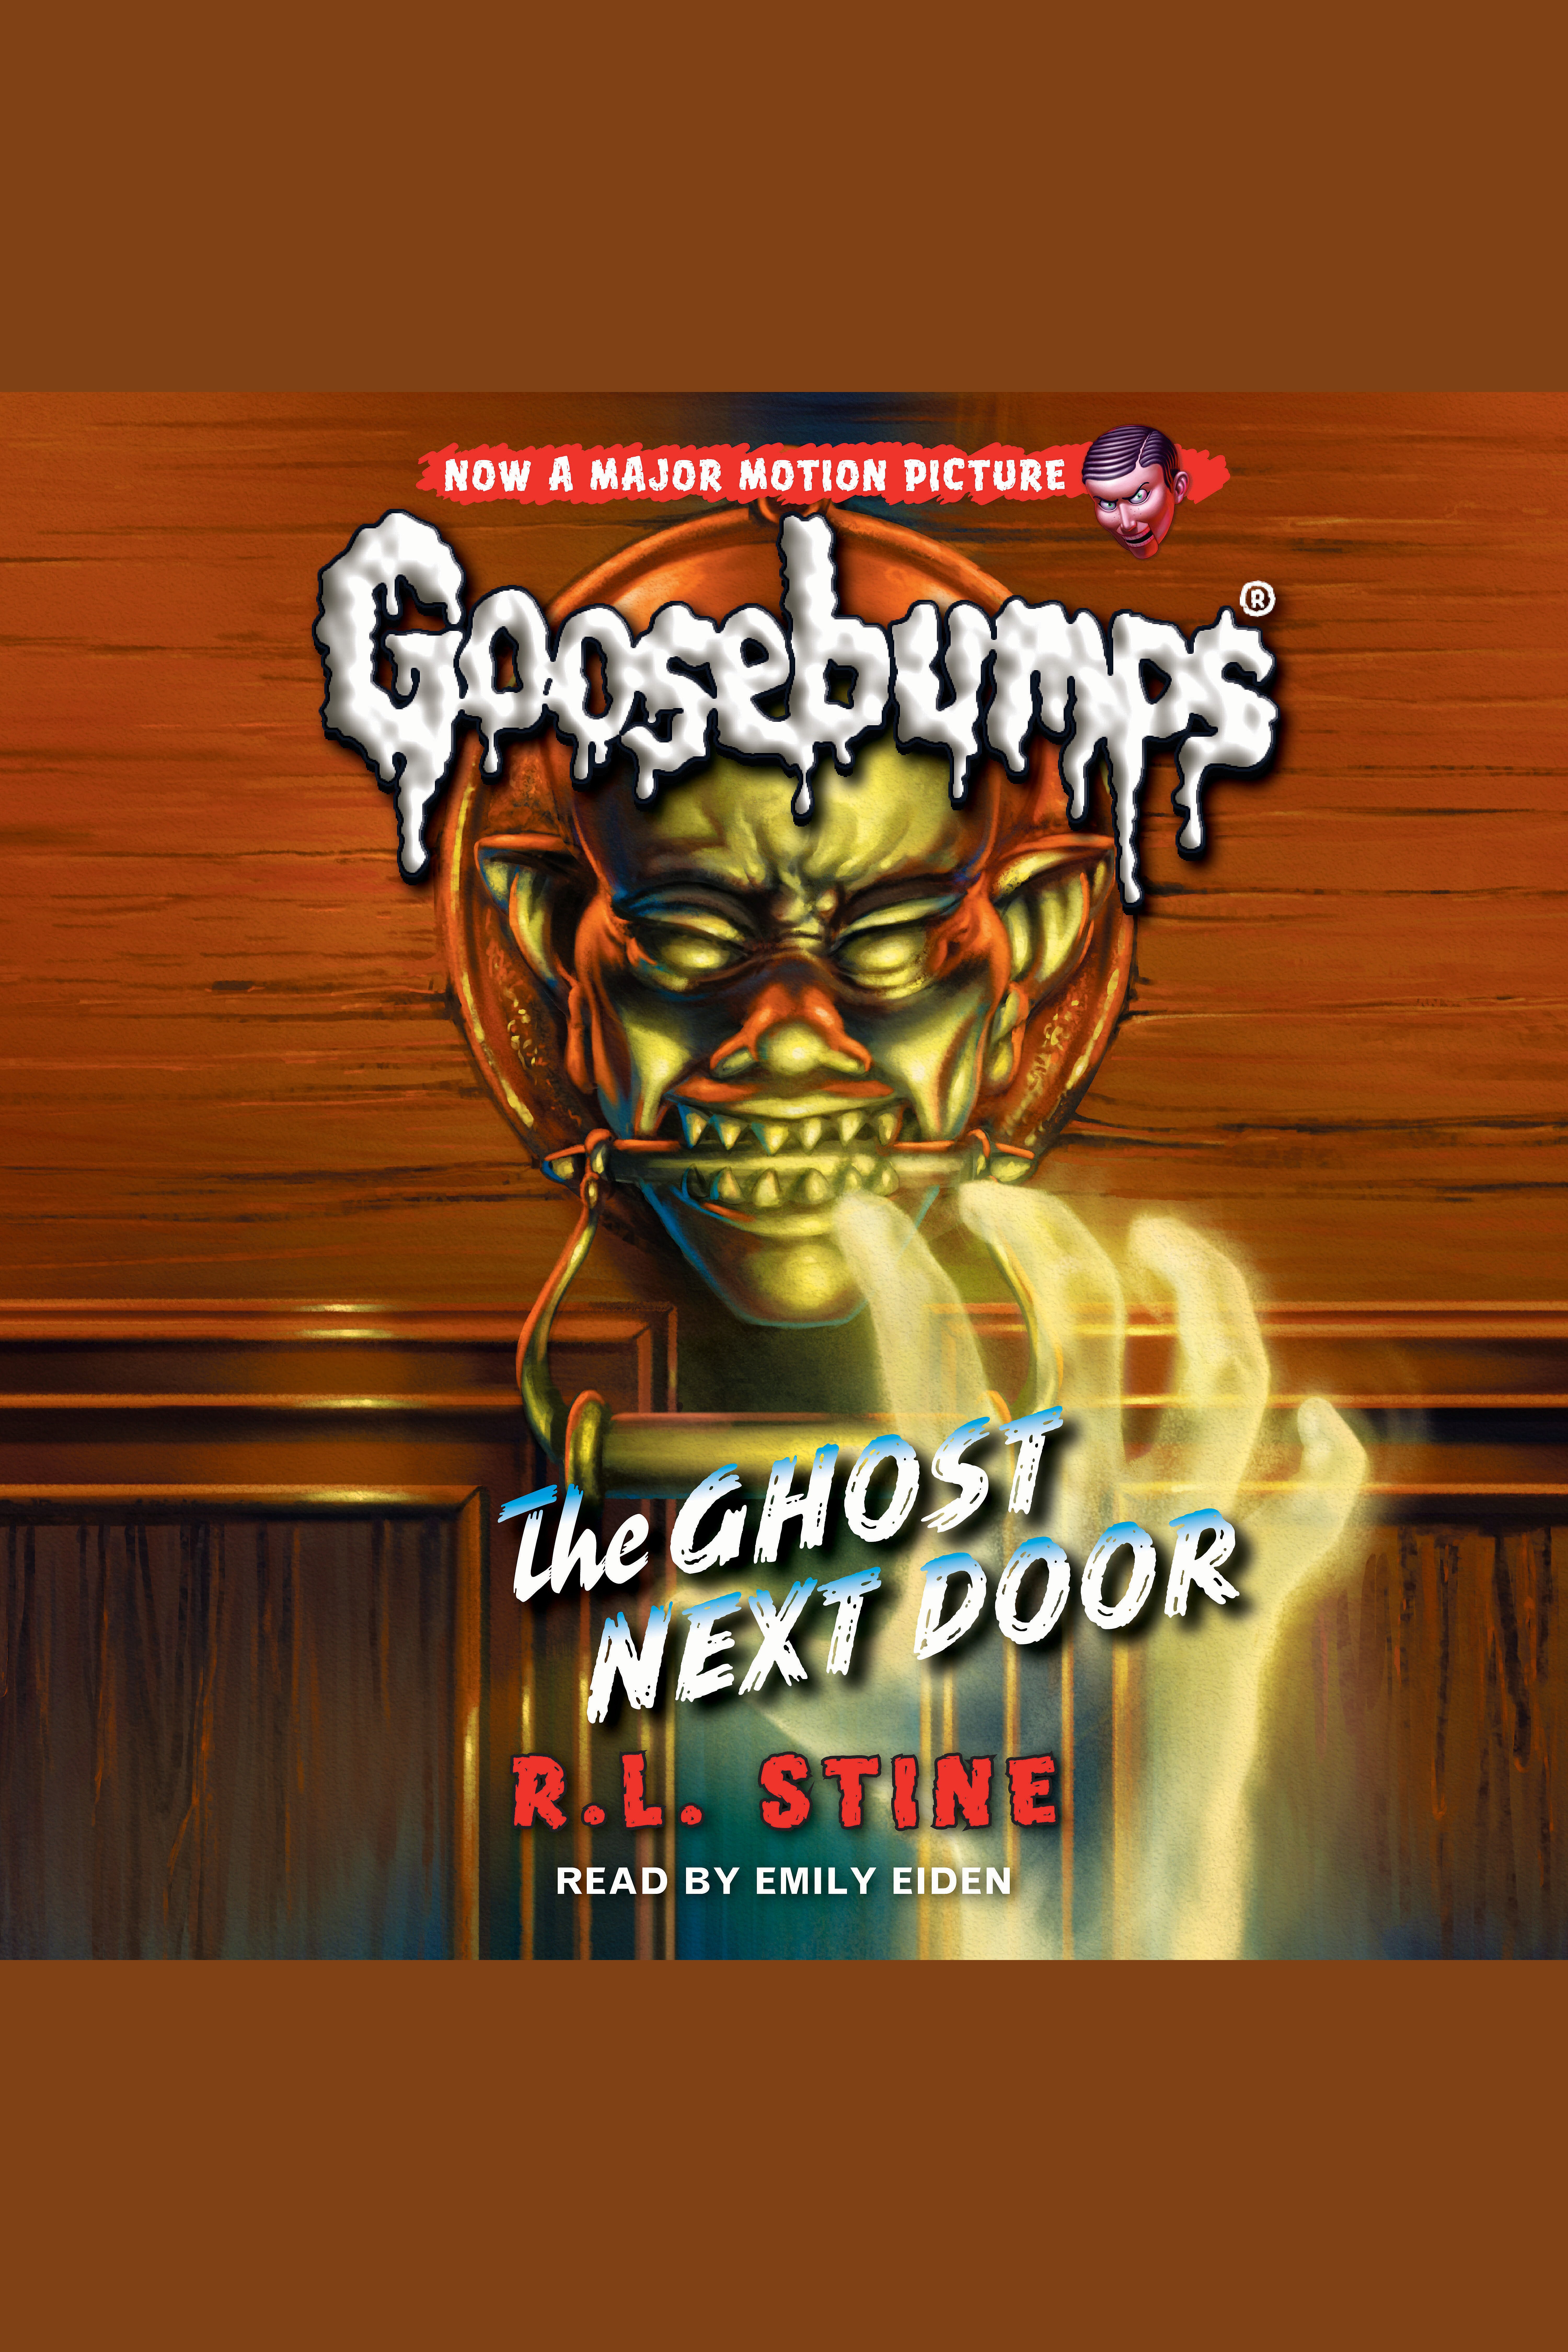 Classic Goosebumps The Ghost Next Door cover image